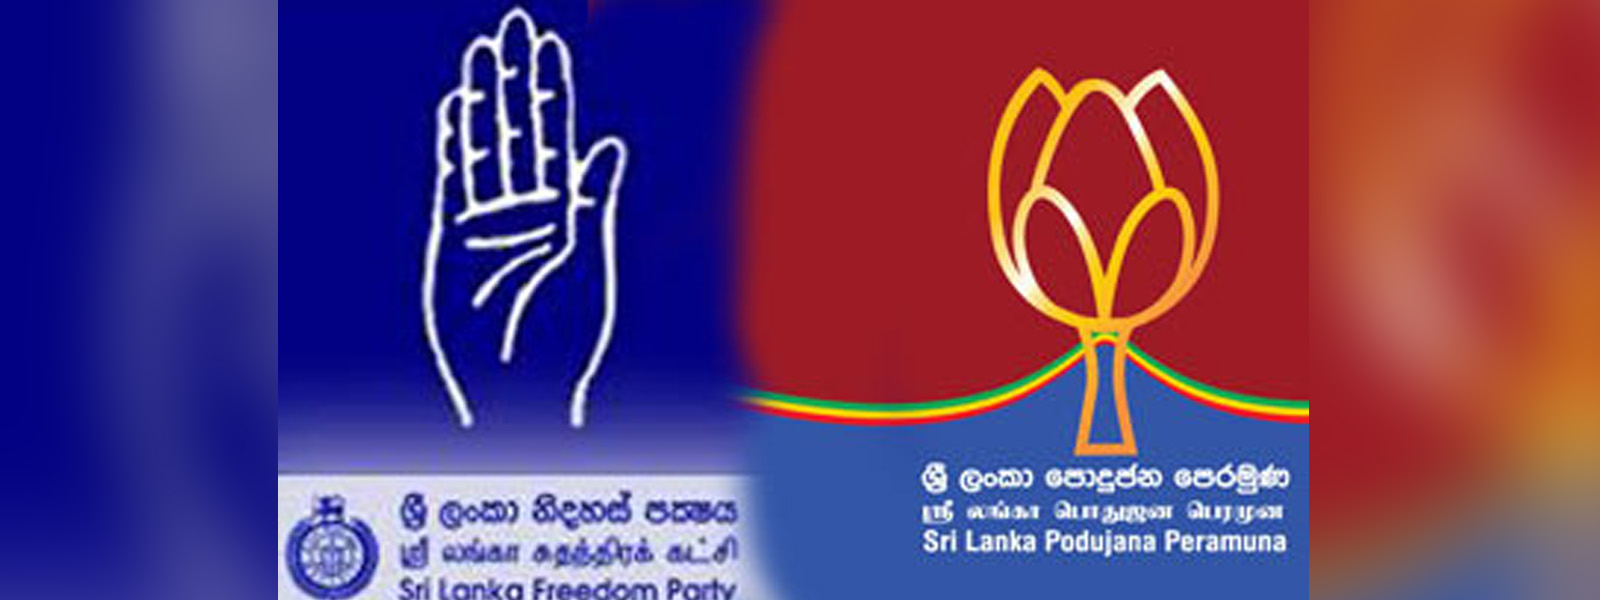 Discussions underway on SLFP and SLPP alliance 